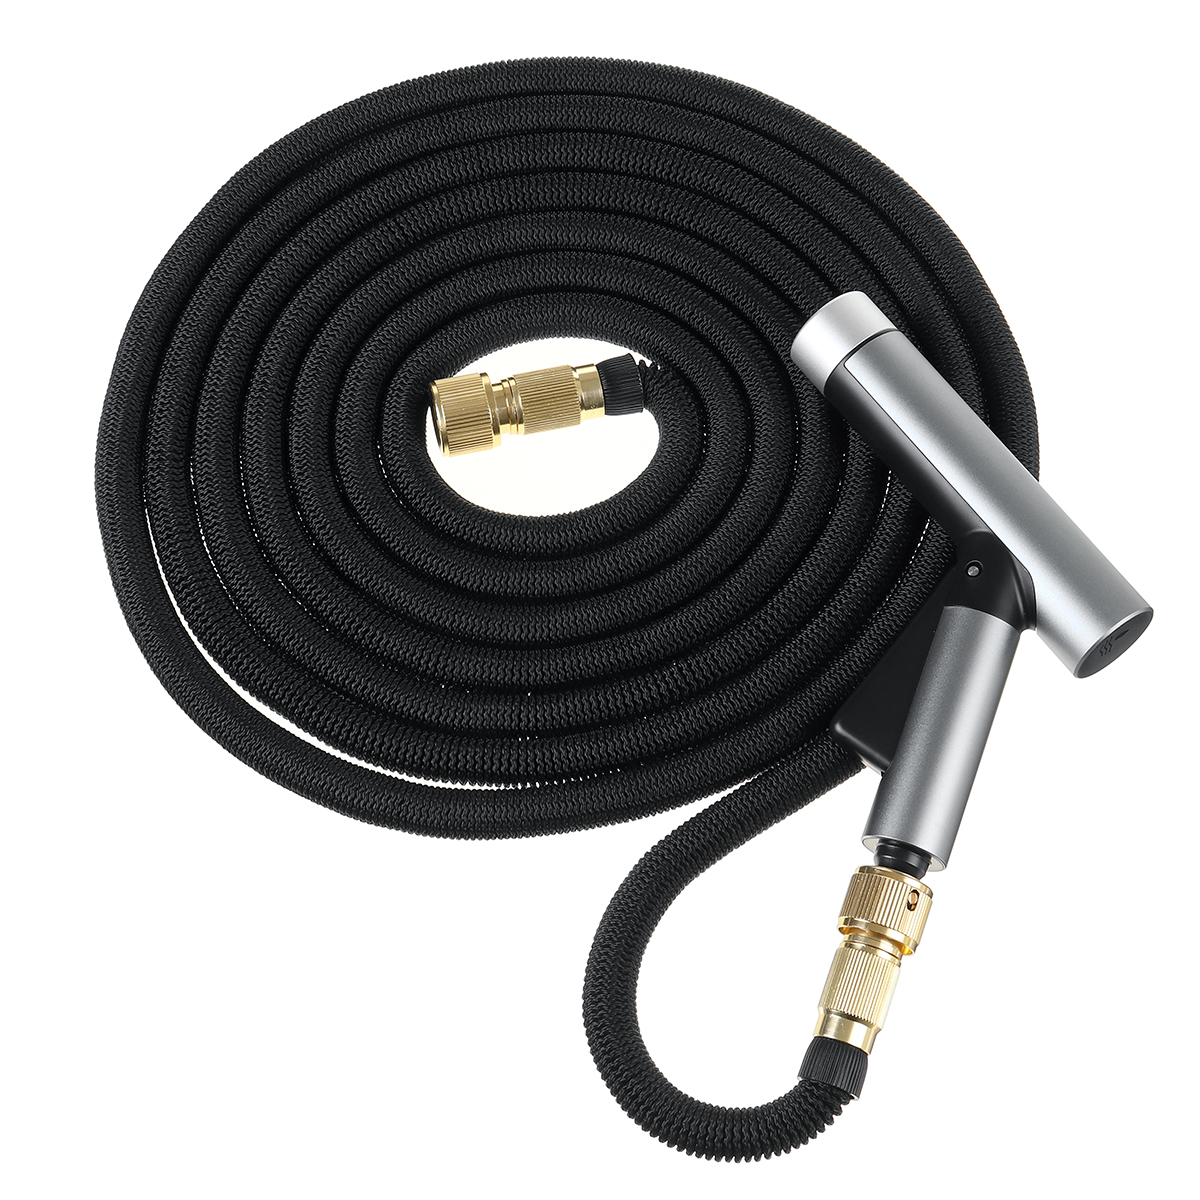 7.5M 15M High Pressure Car Water Spray Washer Flexible Expandable Garden Hose Pipe